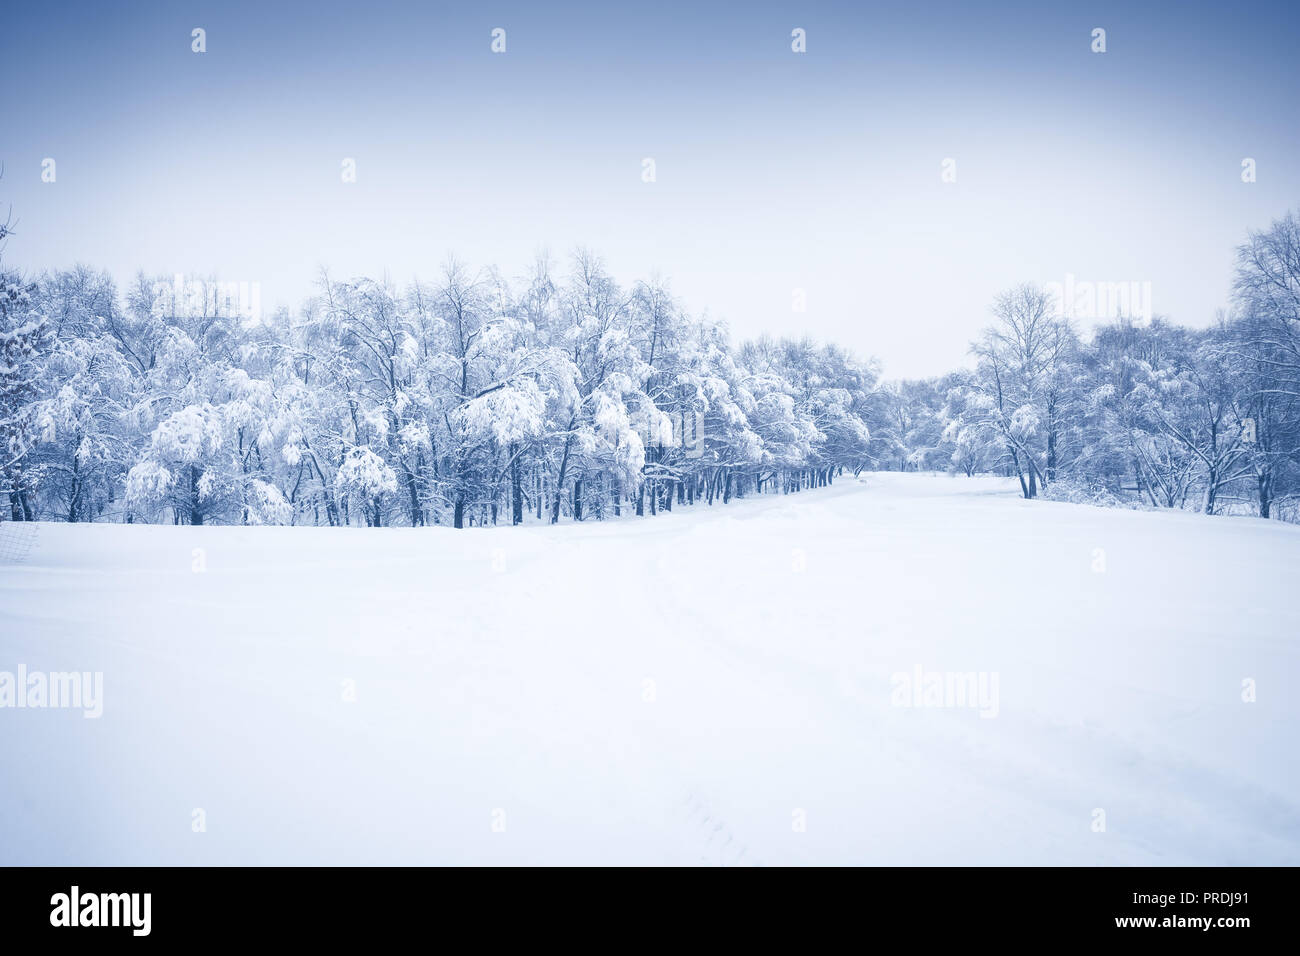 winter Snowing season forest landscape with snowy covered trees  and dramatic sky in blue colors Stock Photo